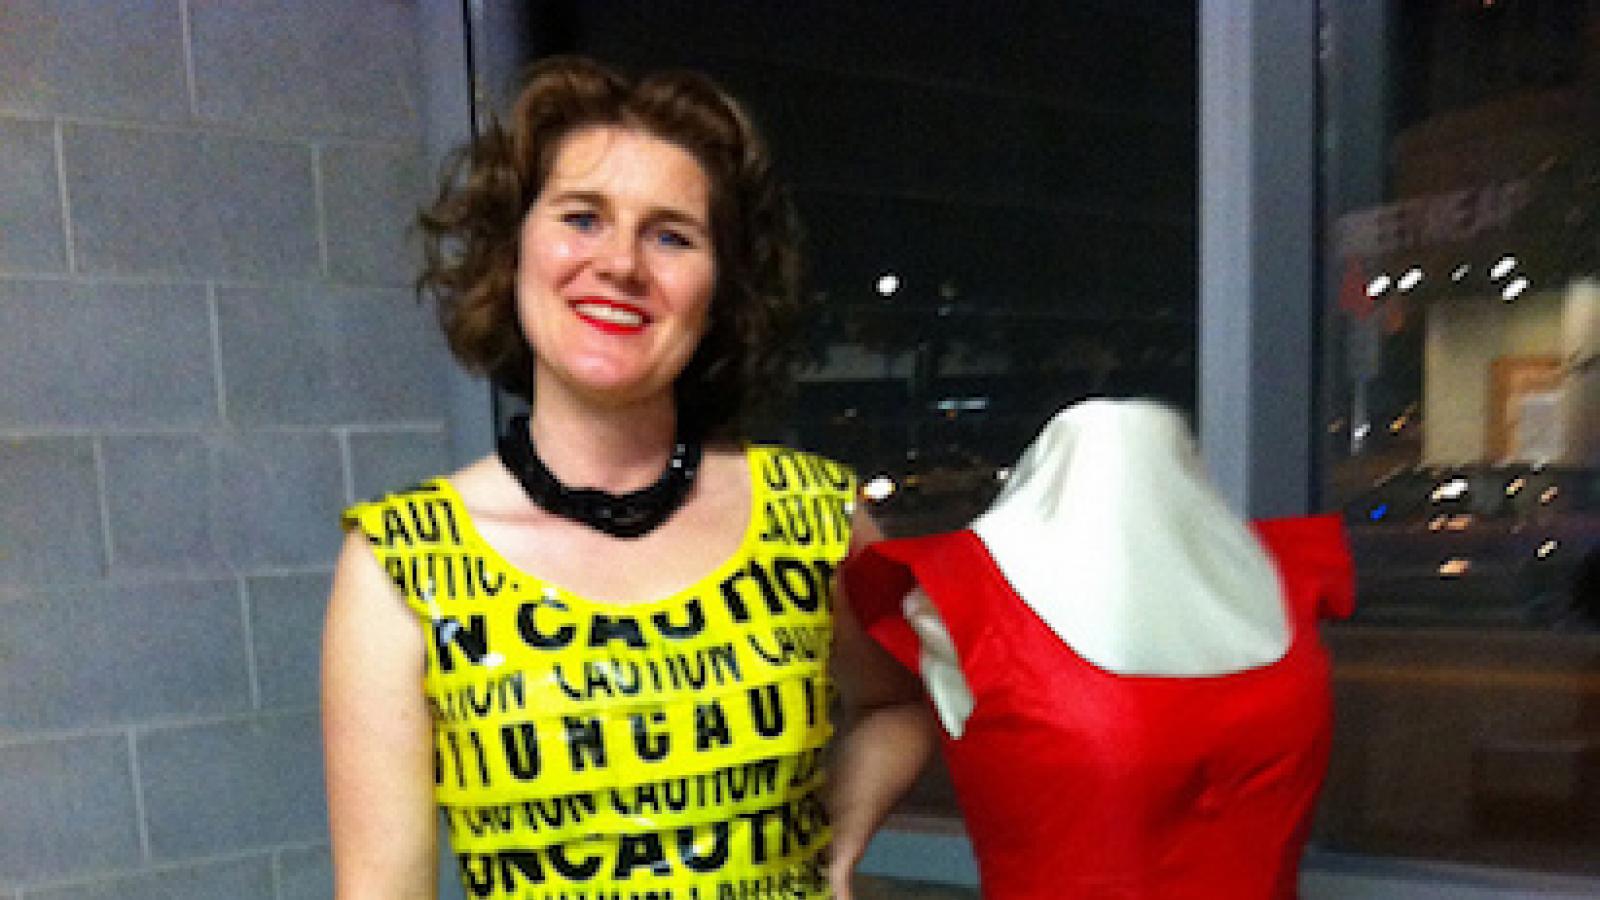 a woman wears a fitted dress made of caution tape and stands next to a dressmakers model wearing a red dress with a scalloped hi lo bottom